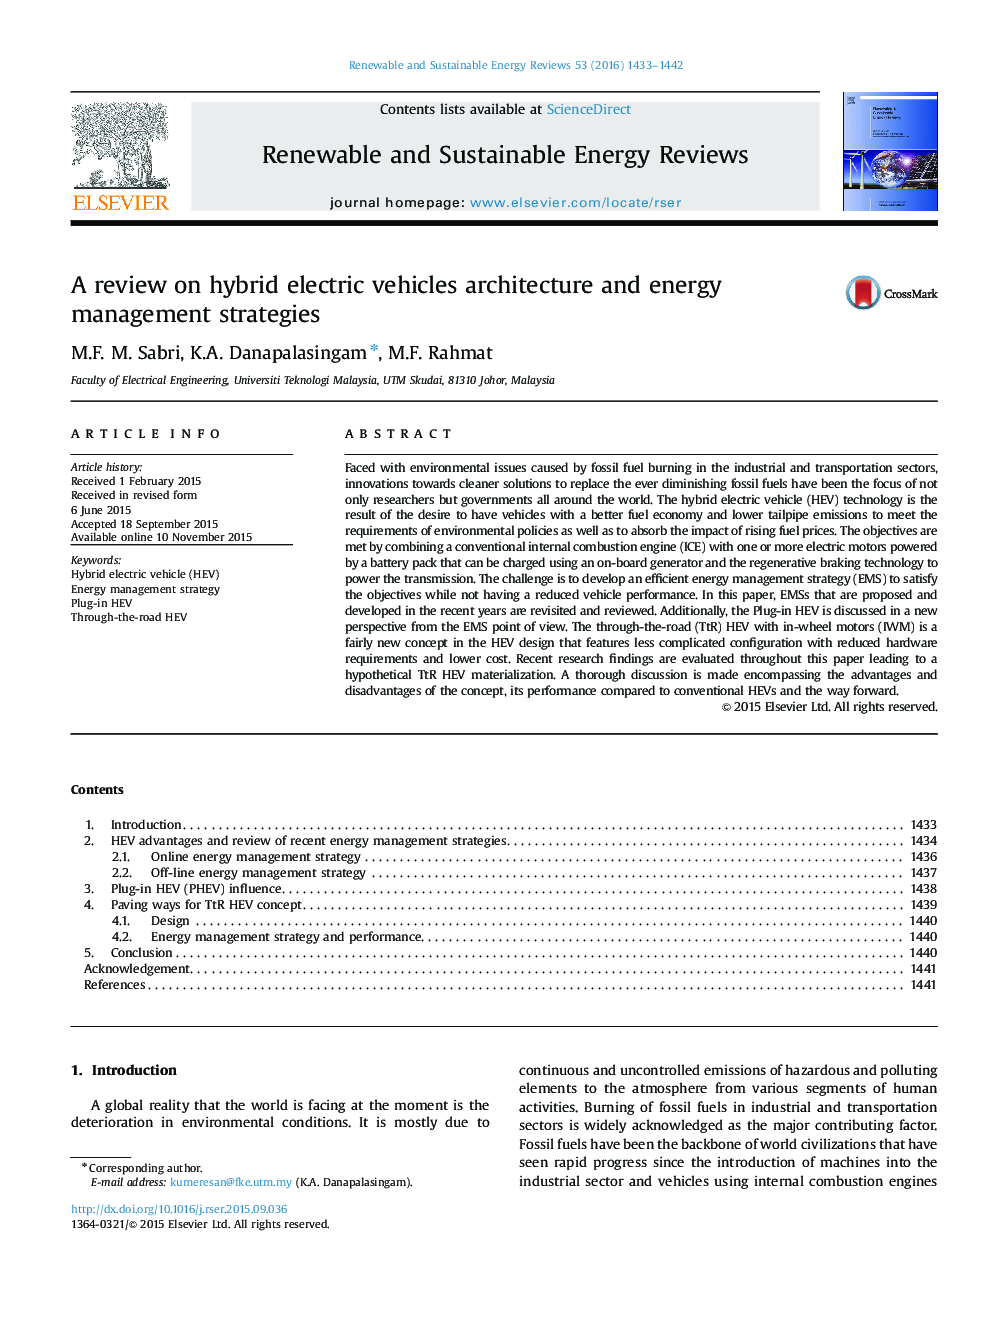 A review on hybrid electric vehicles architecture and energy management strategies